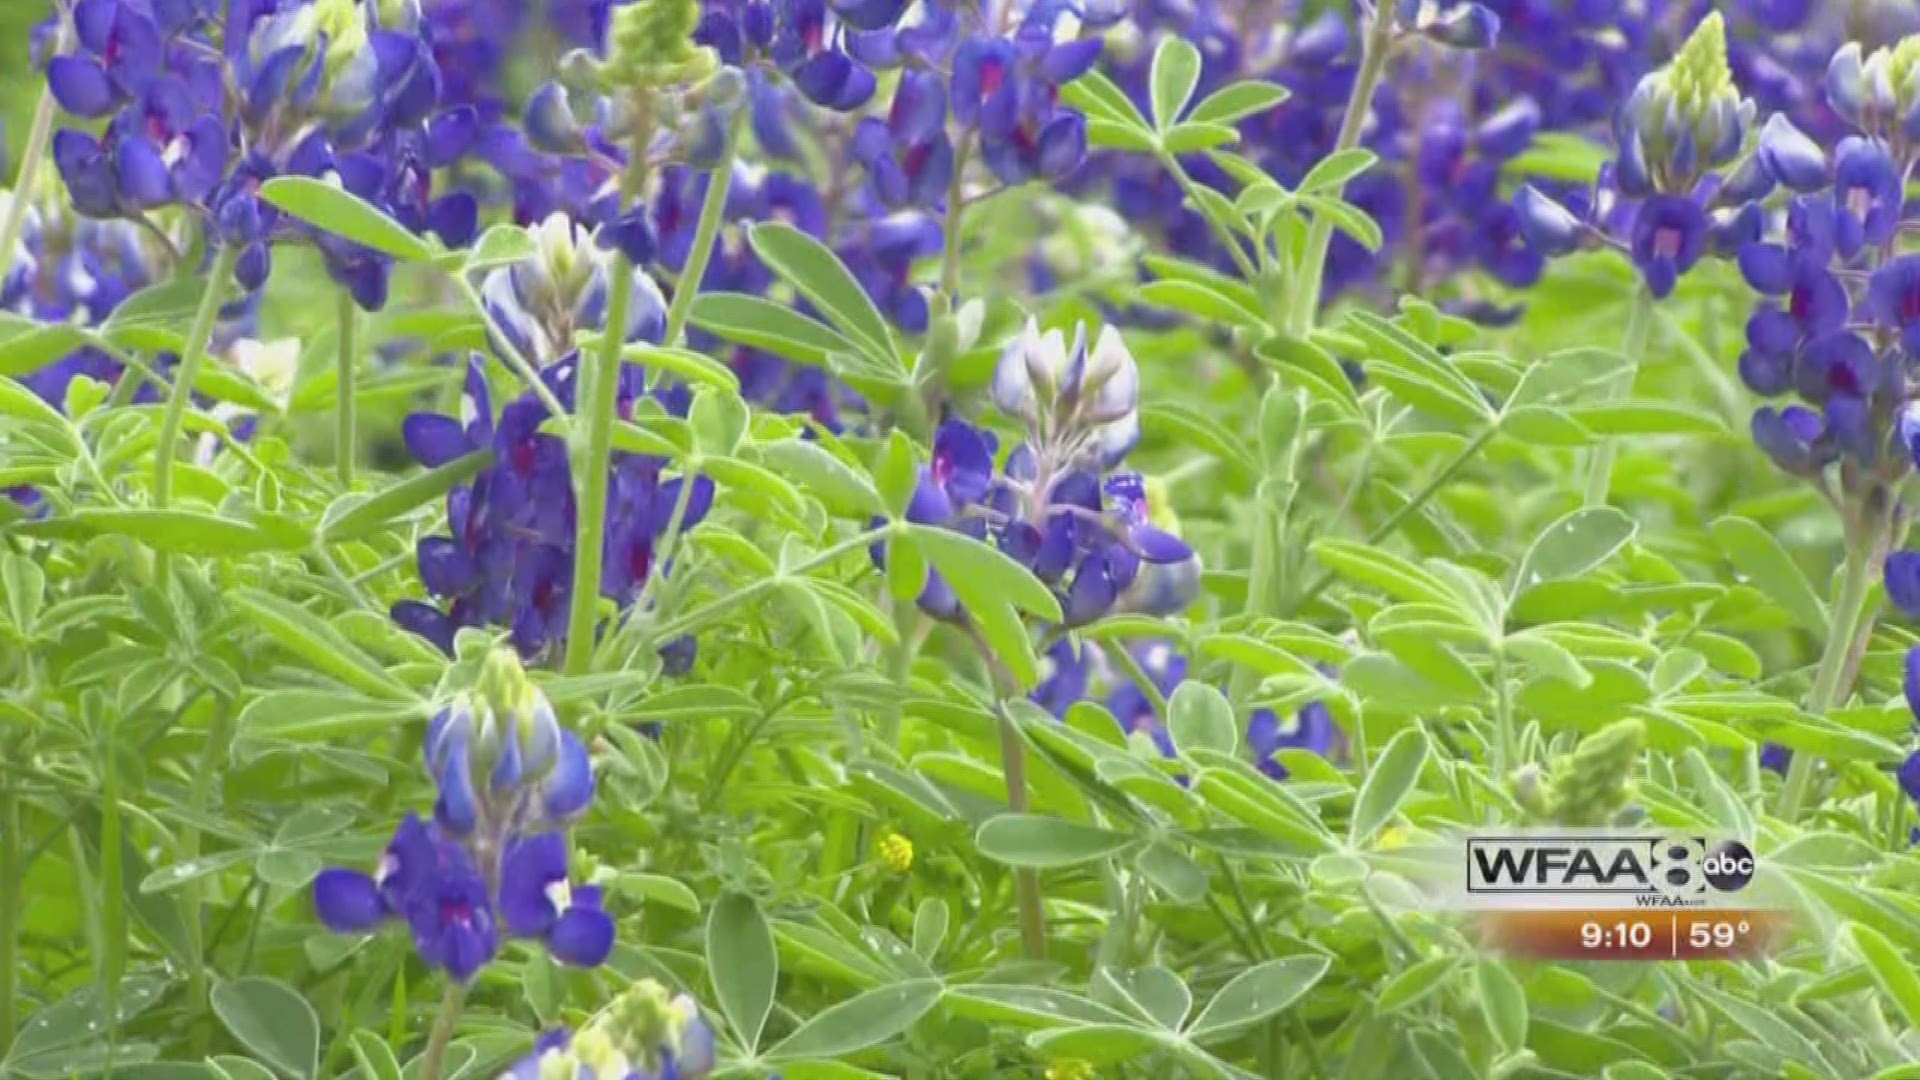 Alanna takes a stroll through a local bluebonnet patch and has some interesting facts you may not know about the state flower.